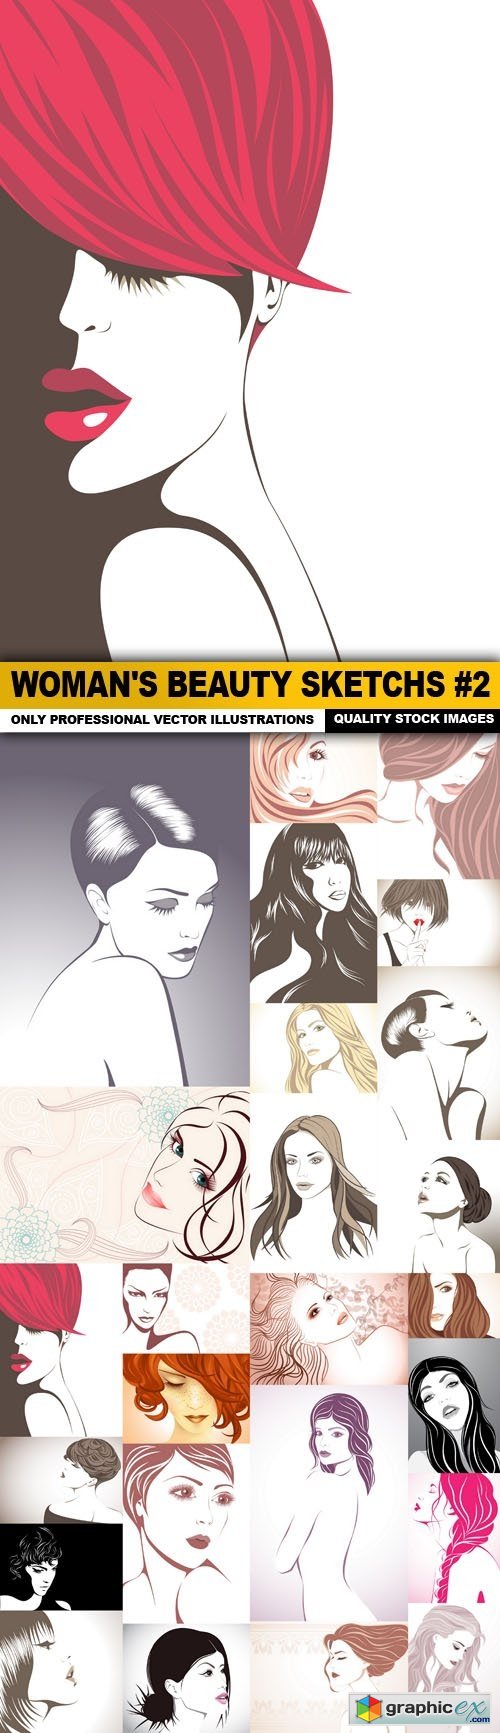 Woman's Beauty Sketchs #2